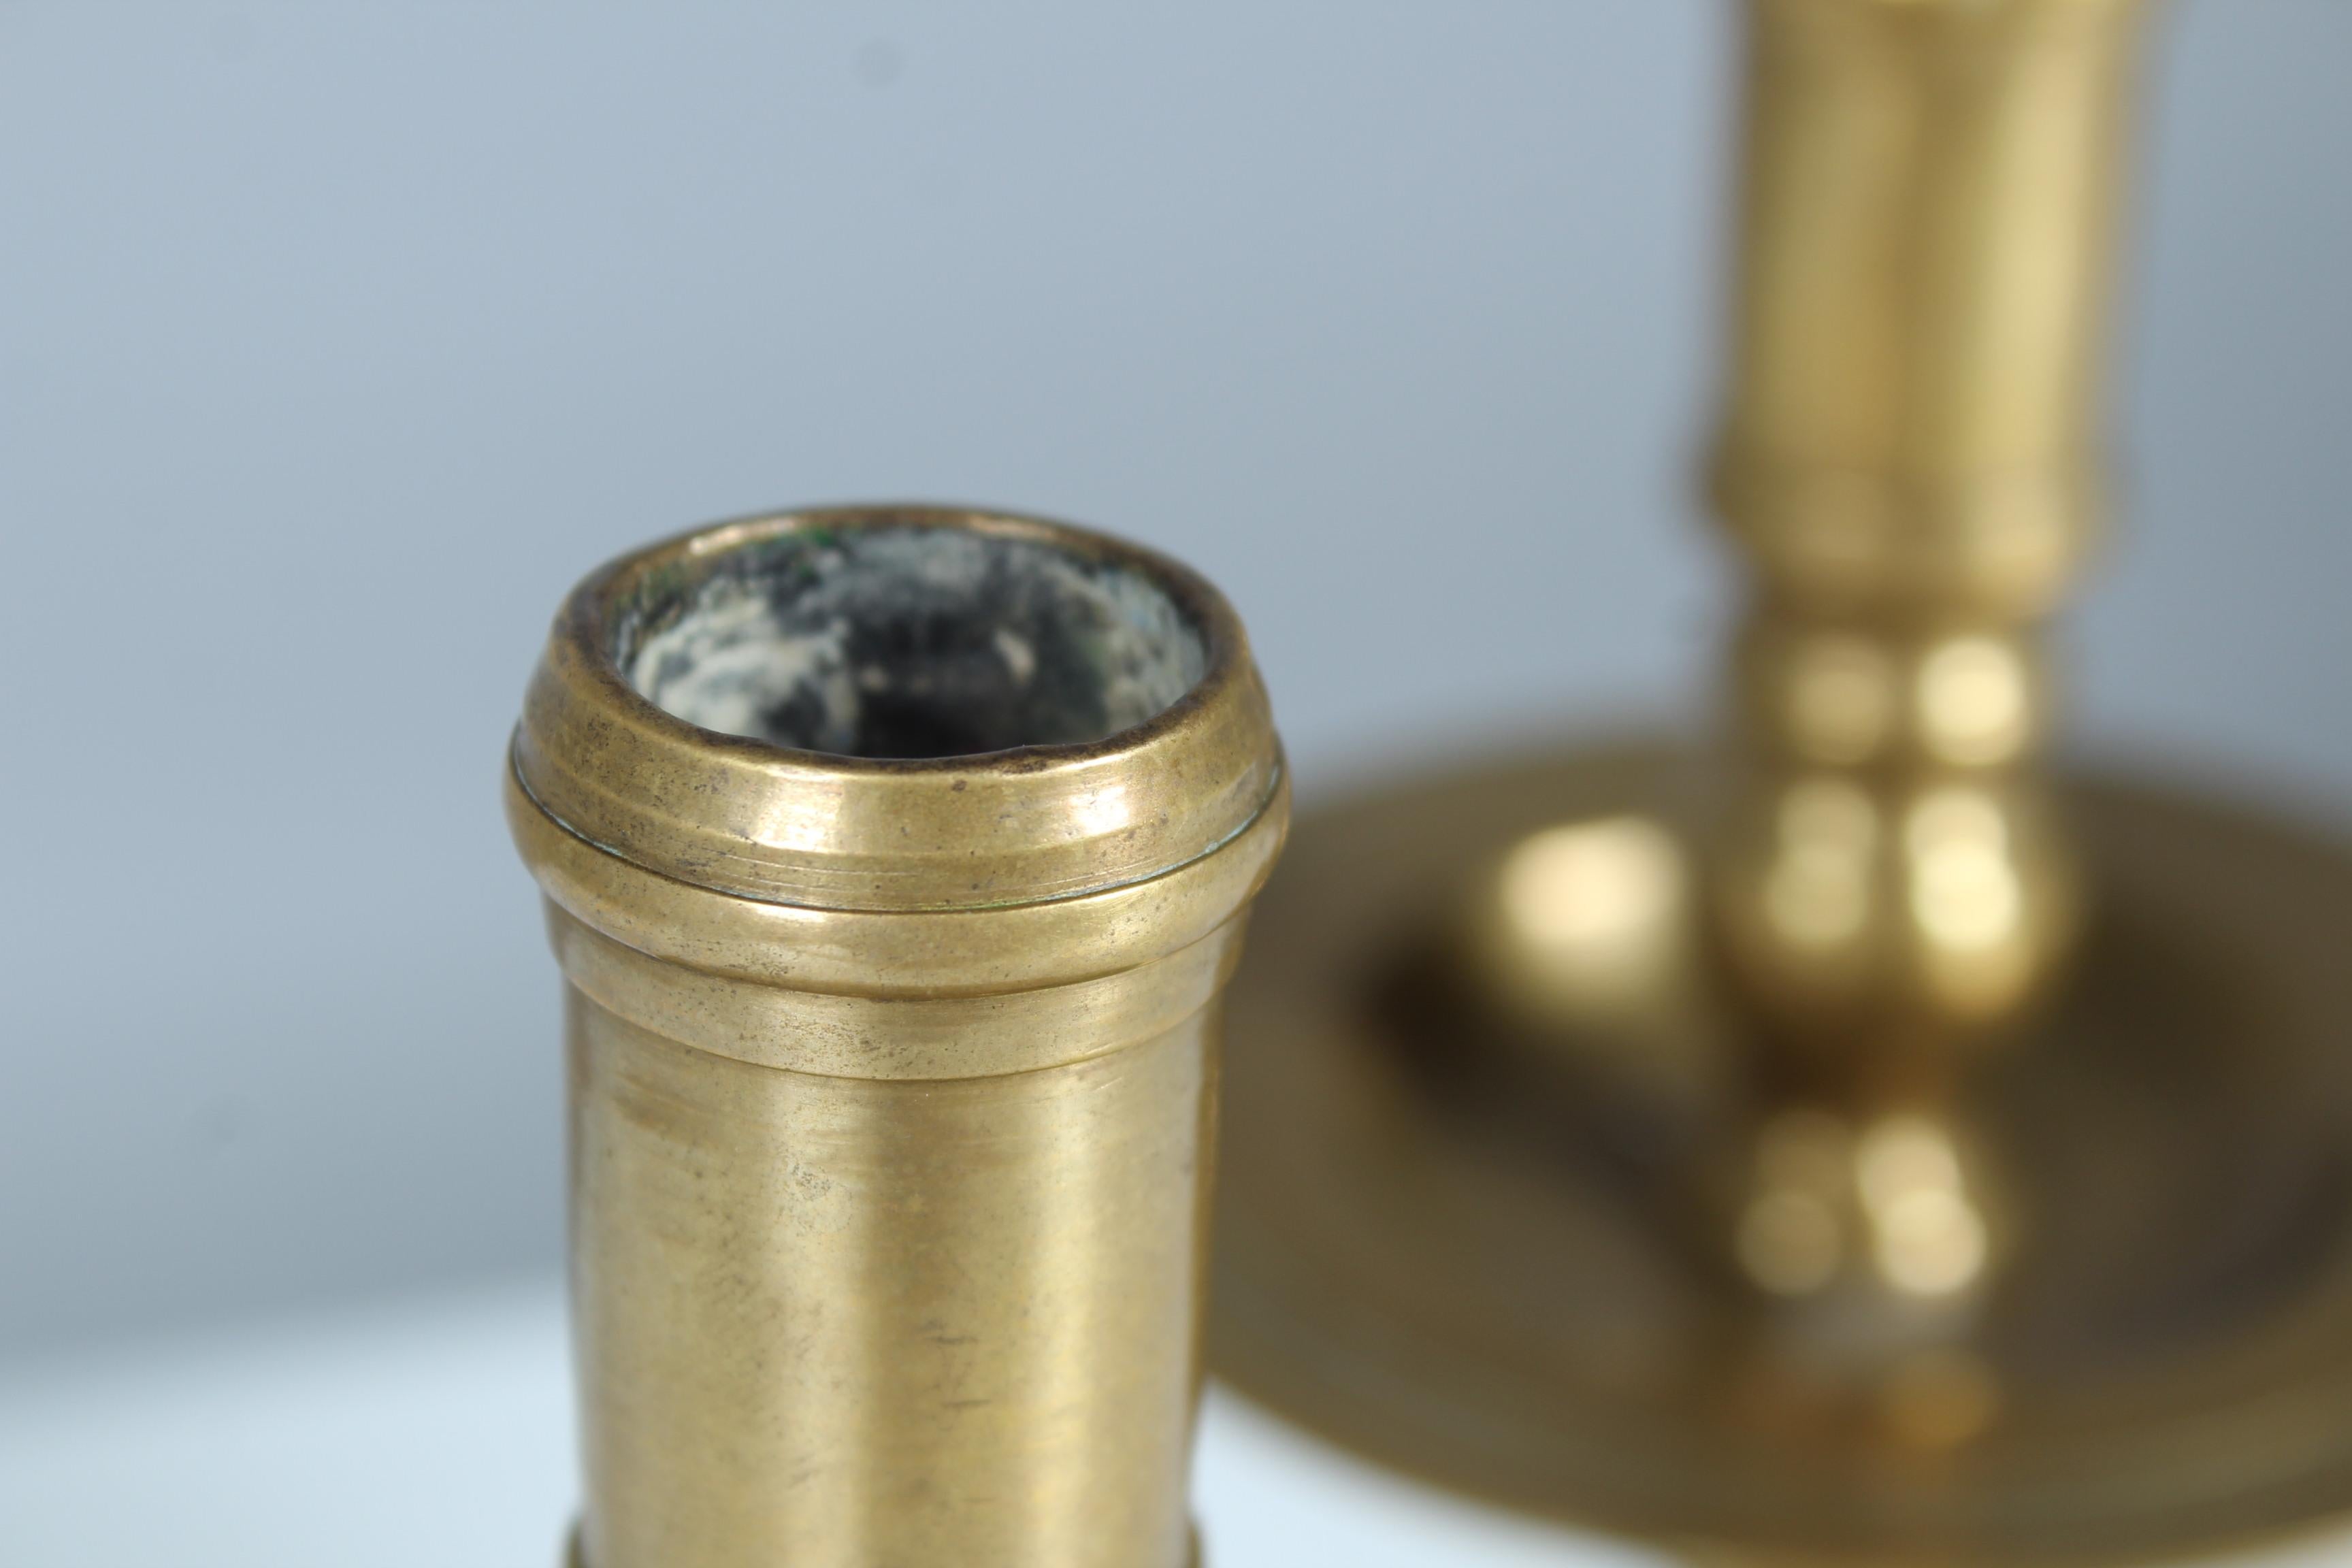 Pair of Antique Candlesticks, Brass, Gilded, Late 19th Century For Sale 3